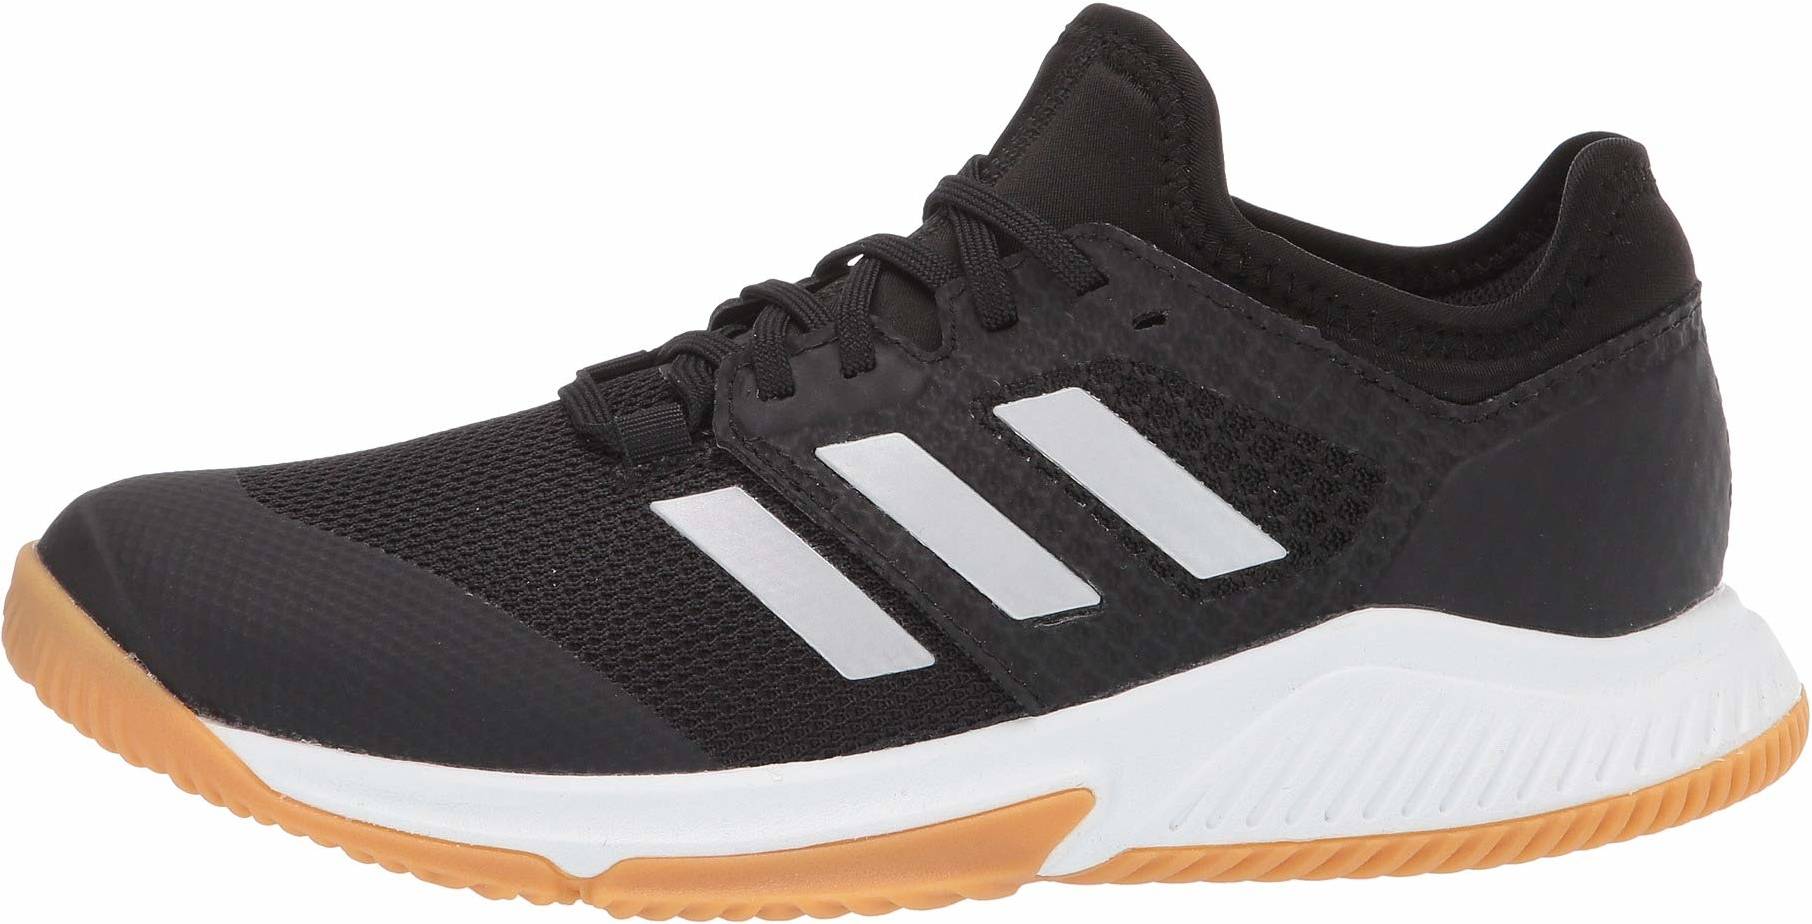 Save 41% on Adidas Volleyball Shoes (6 